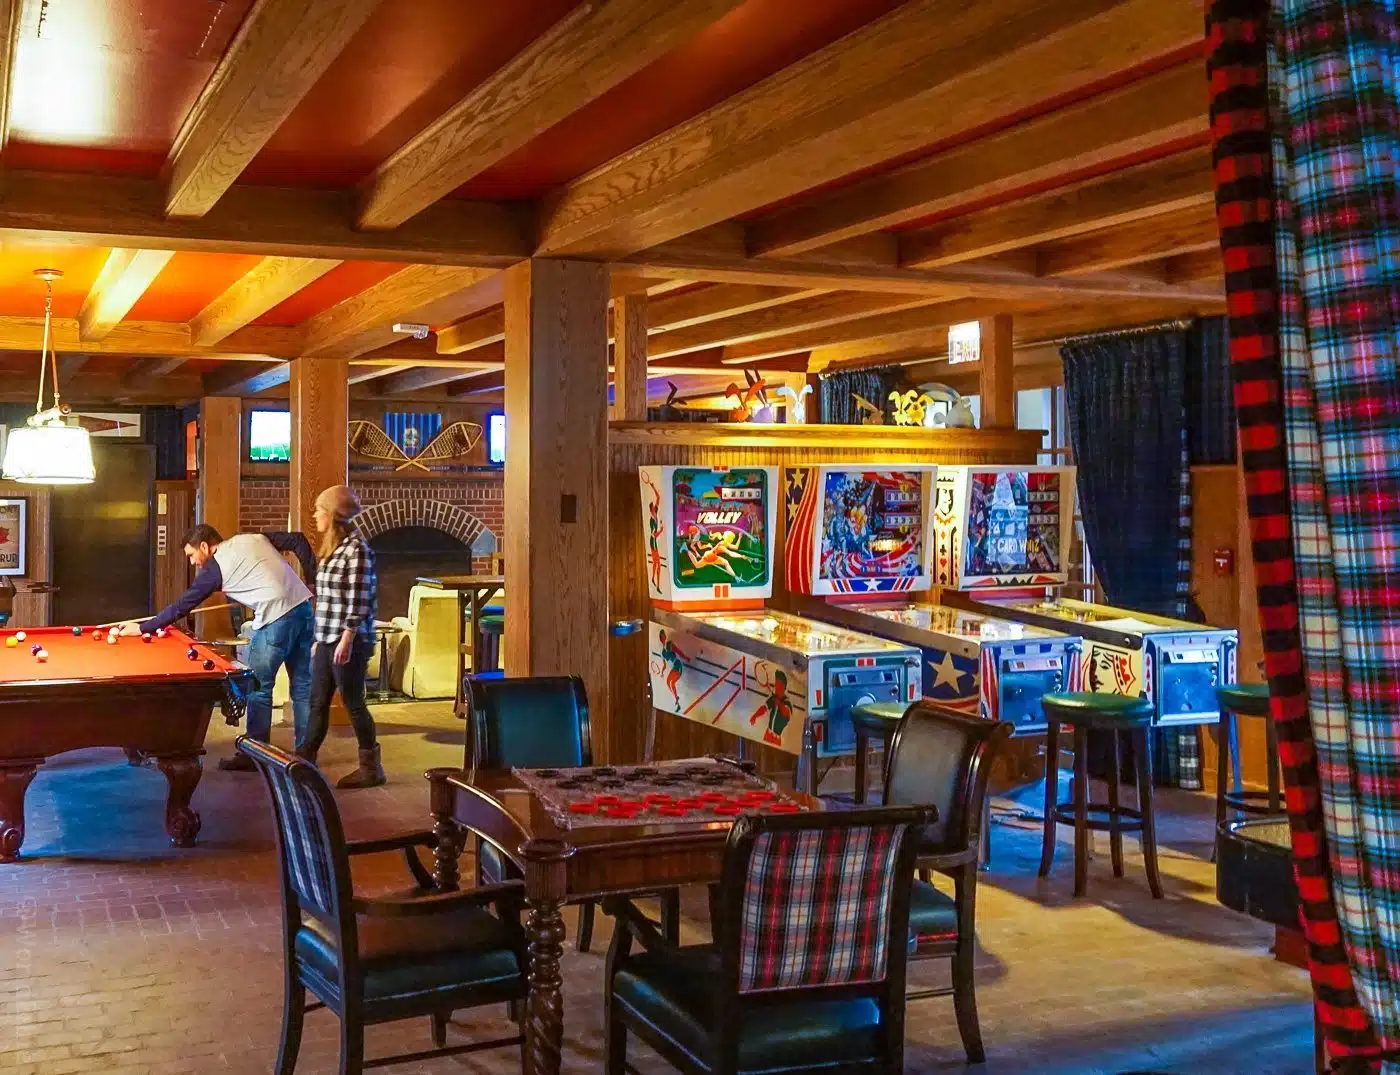 The cozy Game Room at the Woodstock Inn.